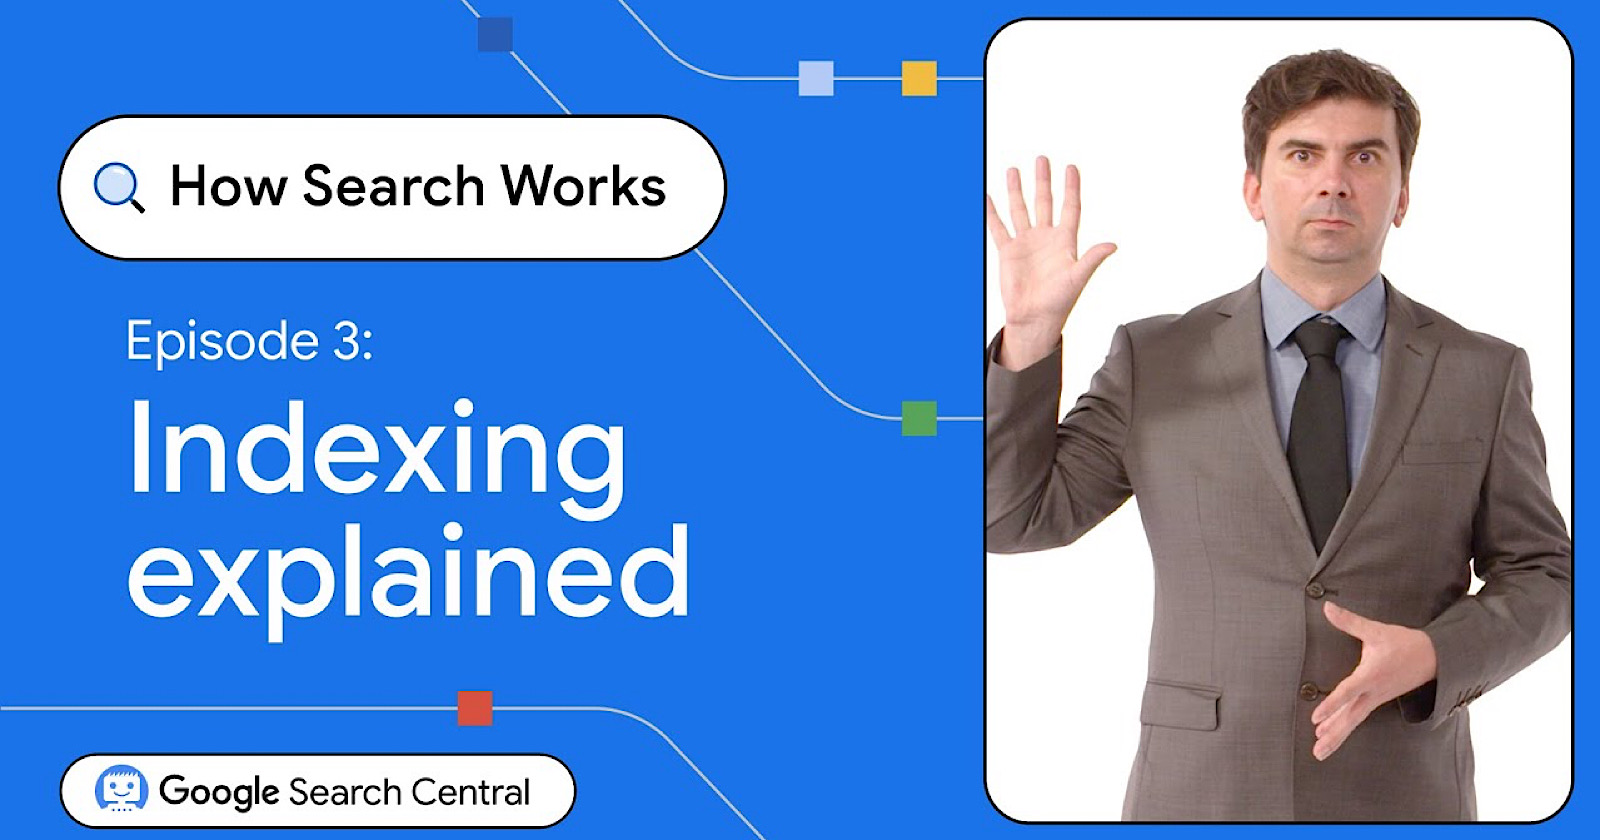 Google’s Indexing Process: When Is “Quality” Determined?